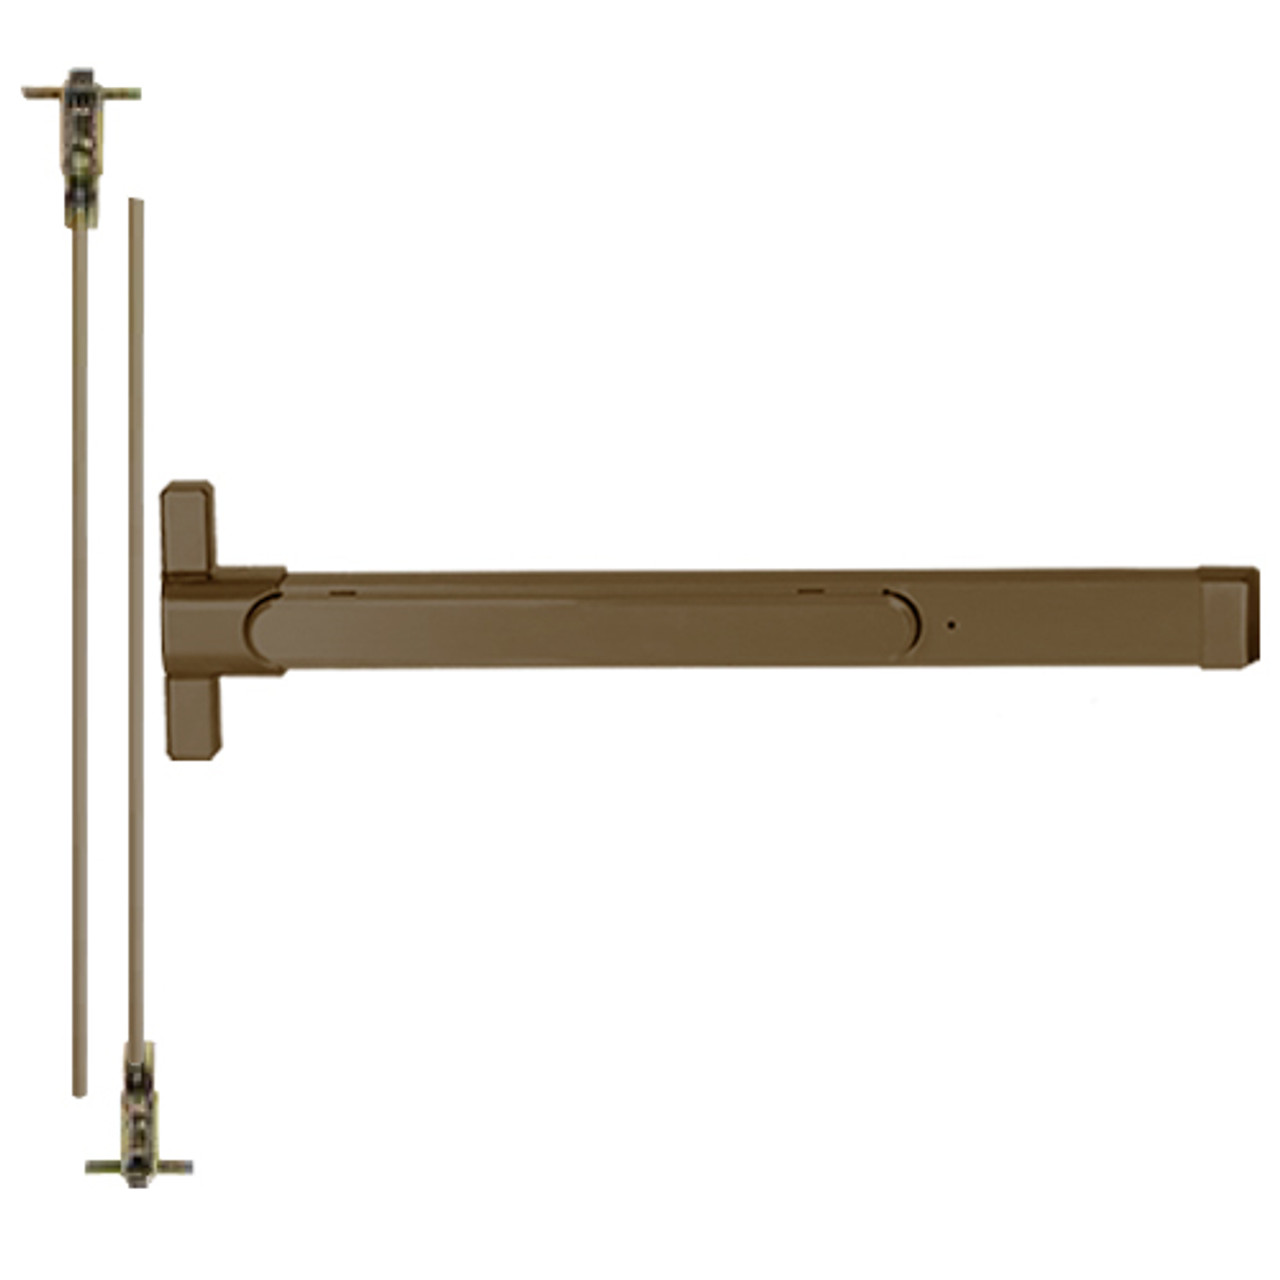 QED224-36-7-313AN Stanley QED200 Series Heavy Duty Narrow Stile Concealed Vertical Rod Hex Dog Exit Device in Anodized Duranodic Bronze Finish